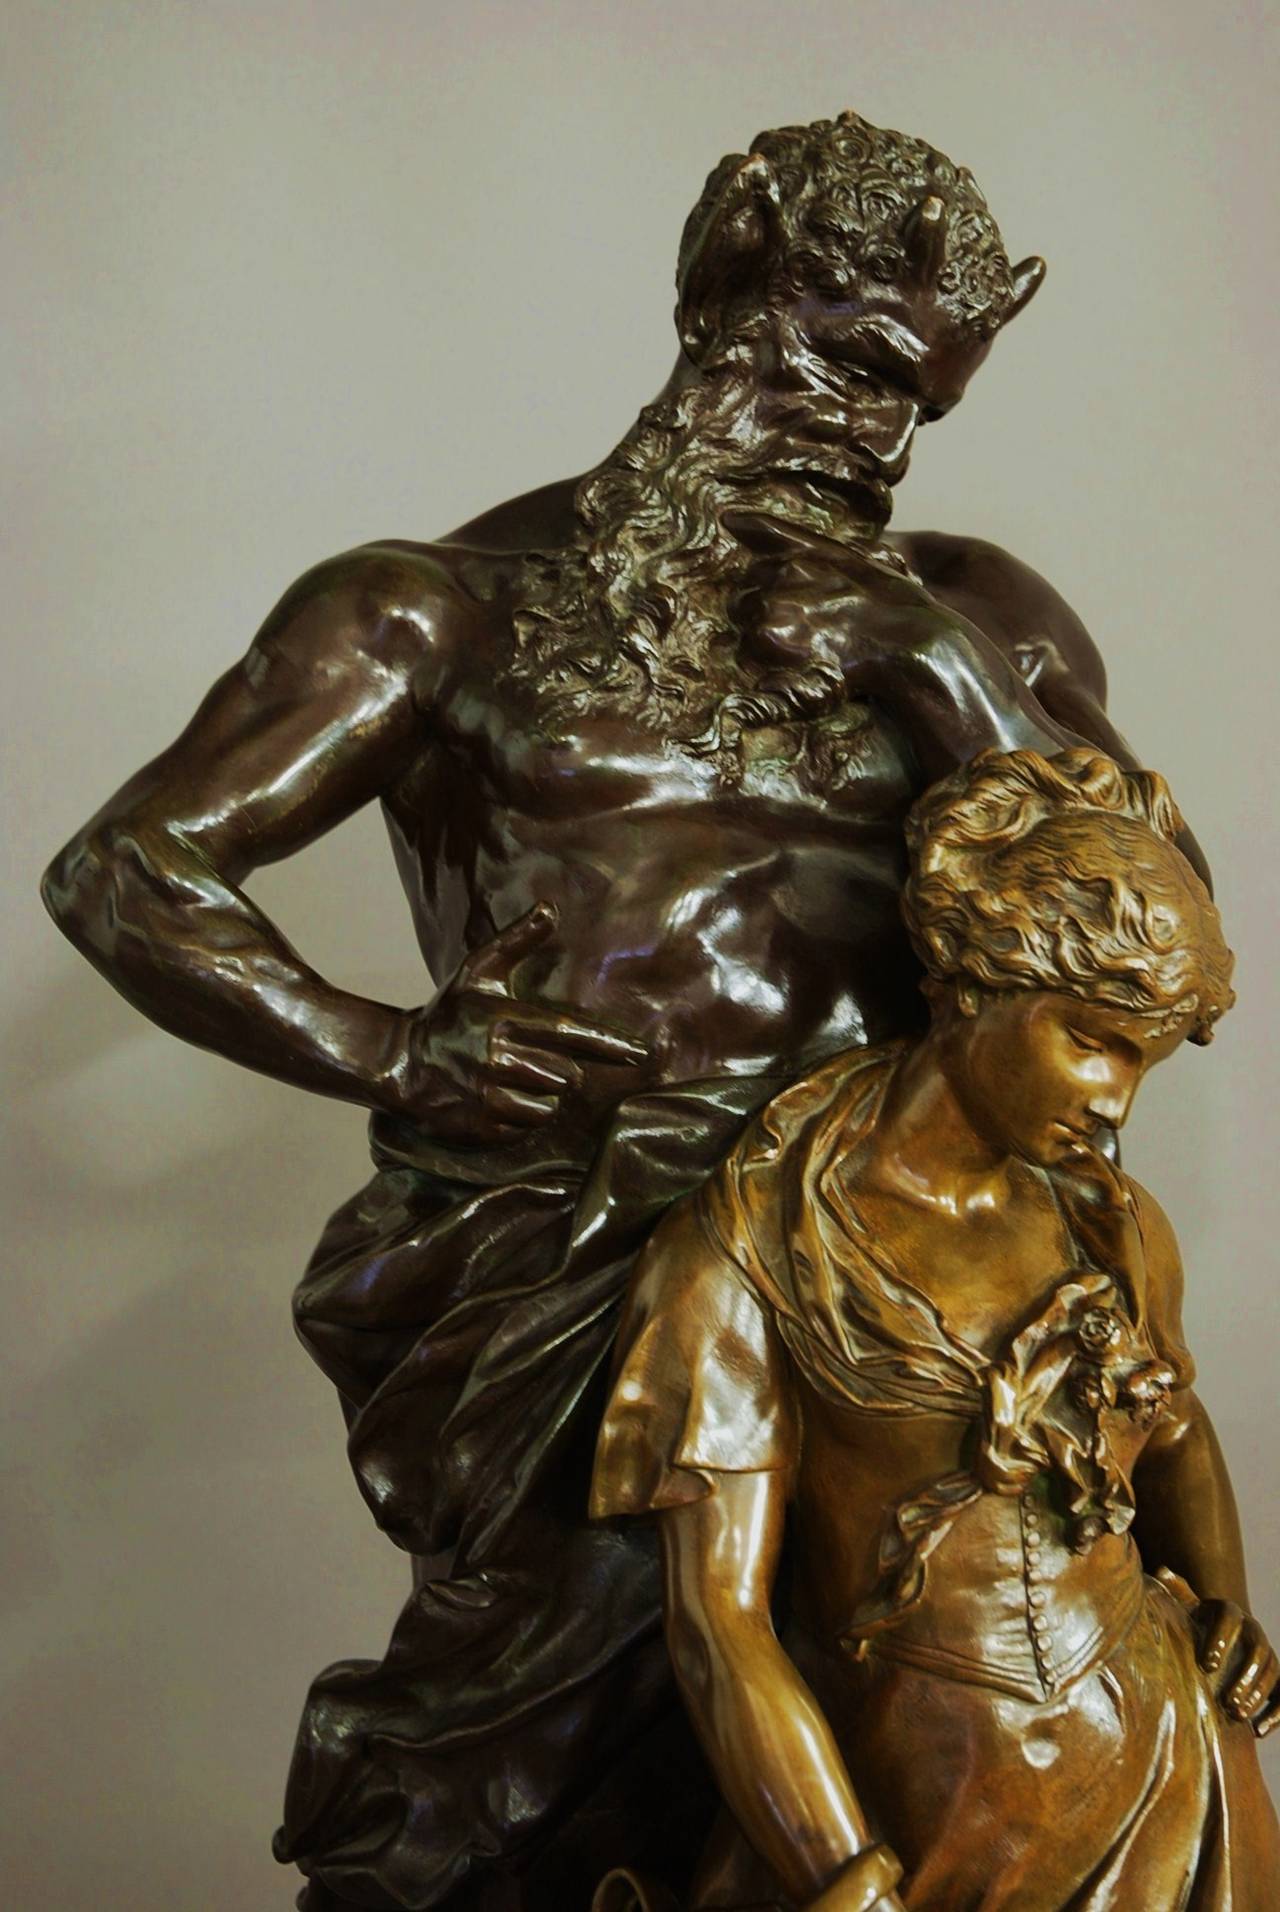 A French superb quality late 19th century large bronze of Pan with a young maiden, circa 1895 by Luca Madrassi (1848-1919) of fine patination.

This bronze consists a young maiden holding a water carrier with Pan depicted behind her staring